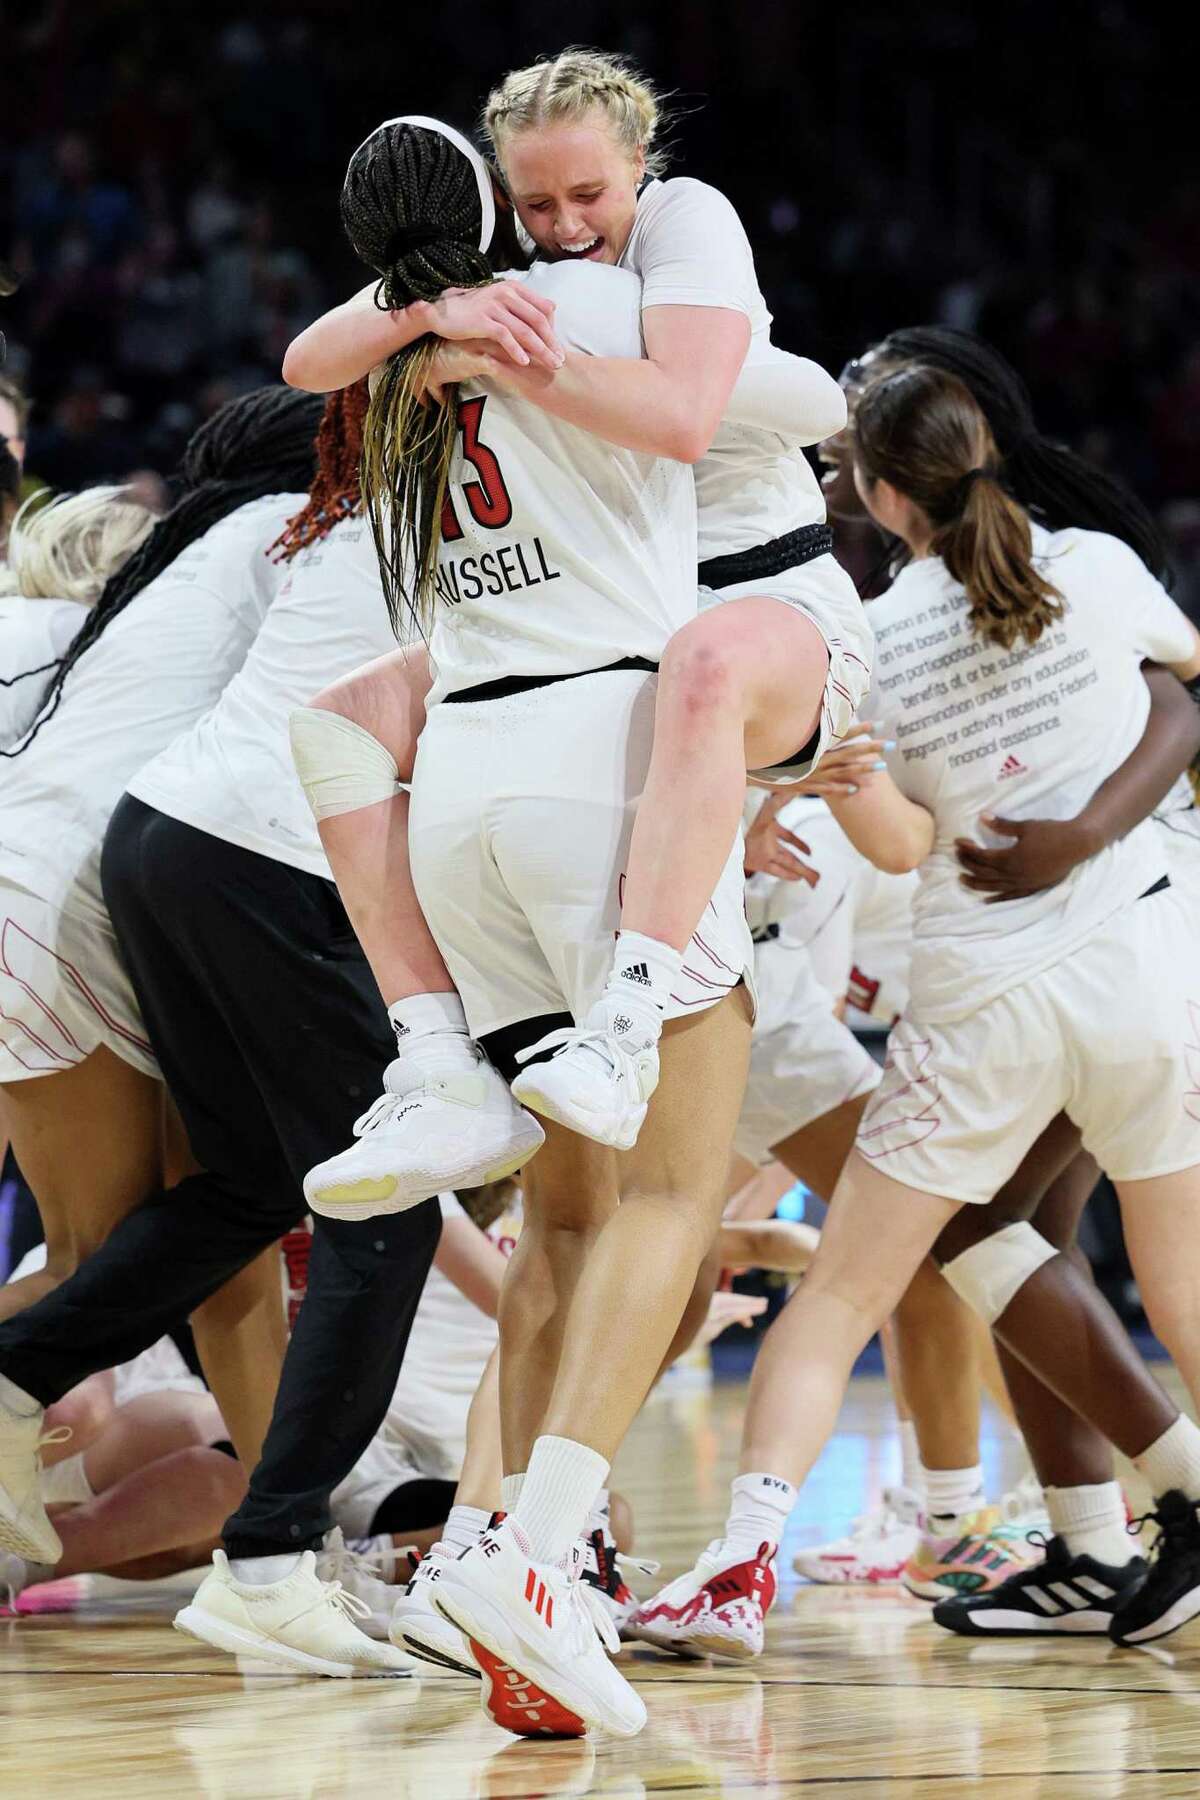 WICHITA, KANSAS - MARCH 28: Hailey Van Lith #10 of the Louisville Cardinals celebrates with Merissah Russell #13 after the 62-50 win over the Michigan Wolverines in the Elite Eight round game of the 2022 NCAA Women's Basketball Tournament at Intrust Bank Arena on March 28, 2022 in Wichita, Kansas. (Photo by Andy Lyons/Getty Images)